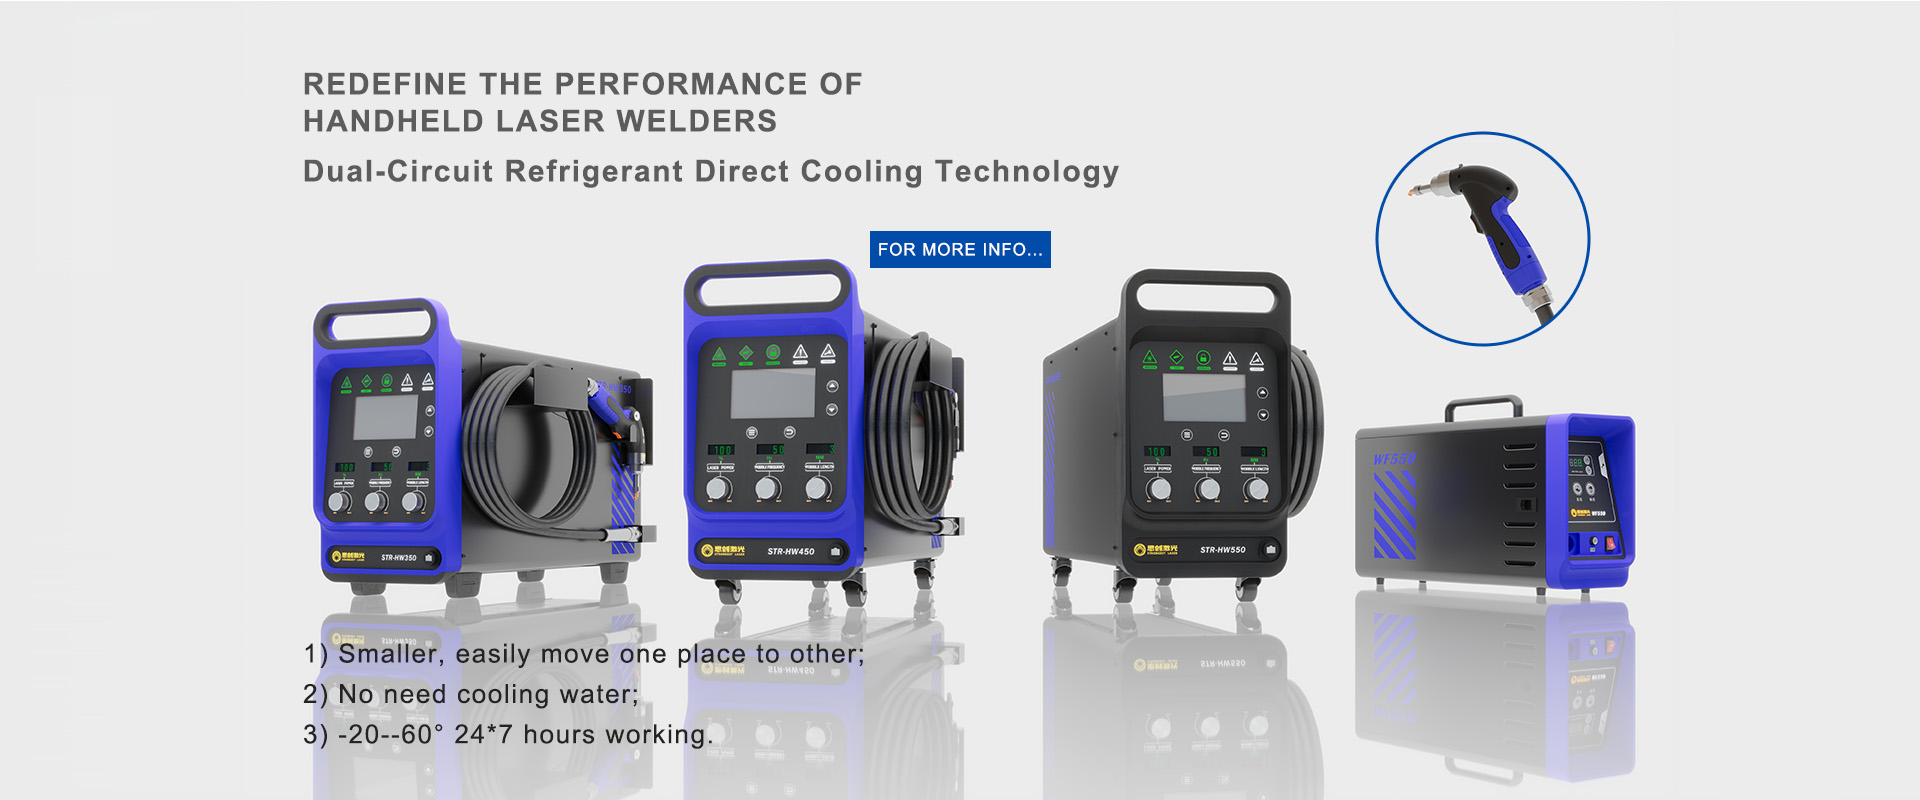 Dual-Circuit Refrigerant Direct Cooling Technology